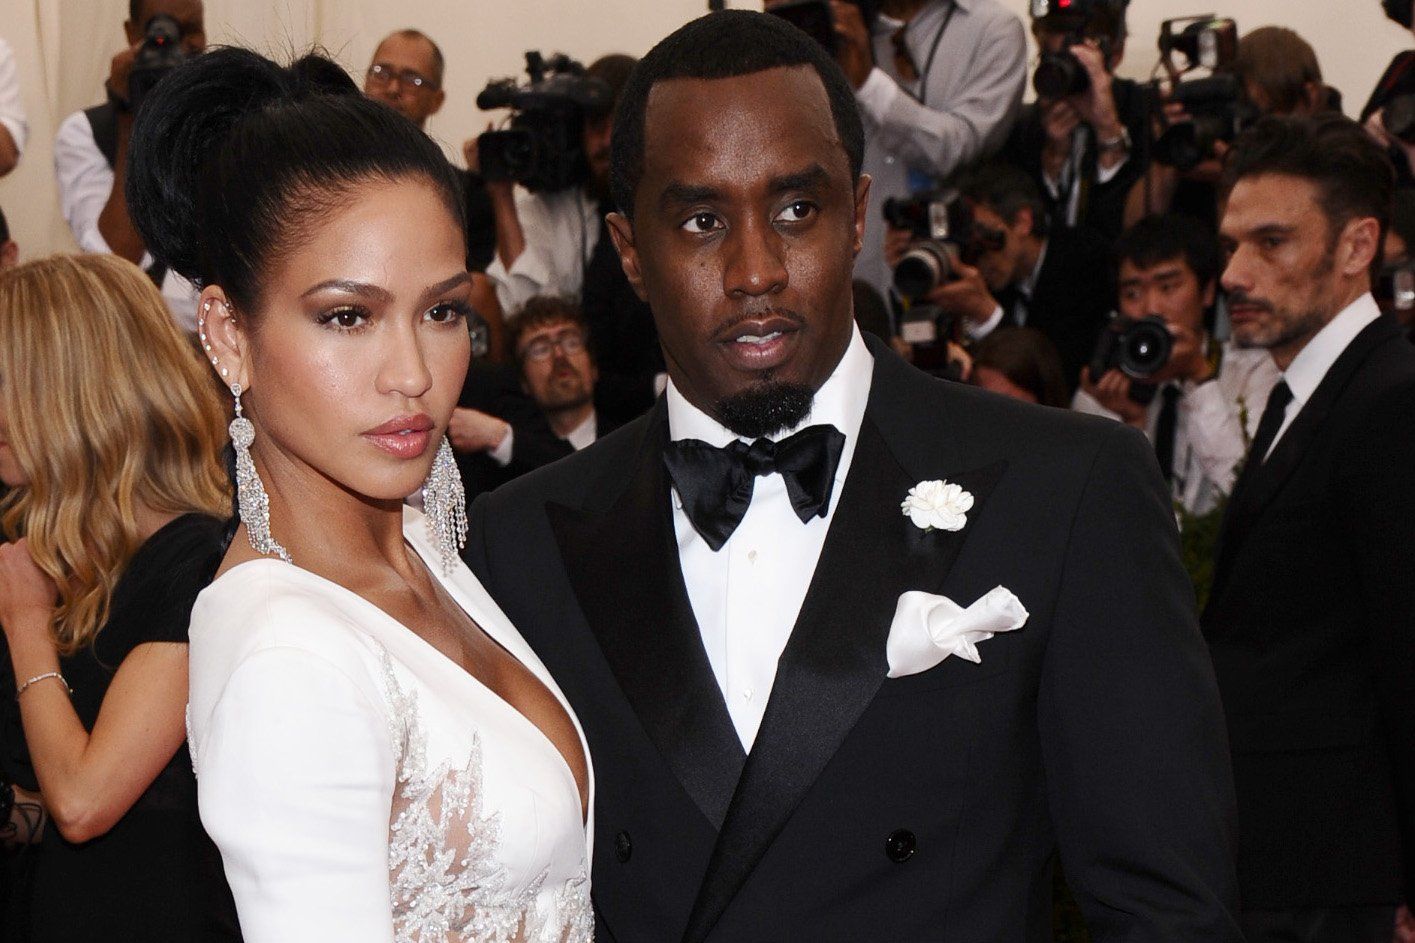 Puff daddy and wife